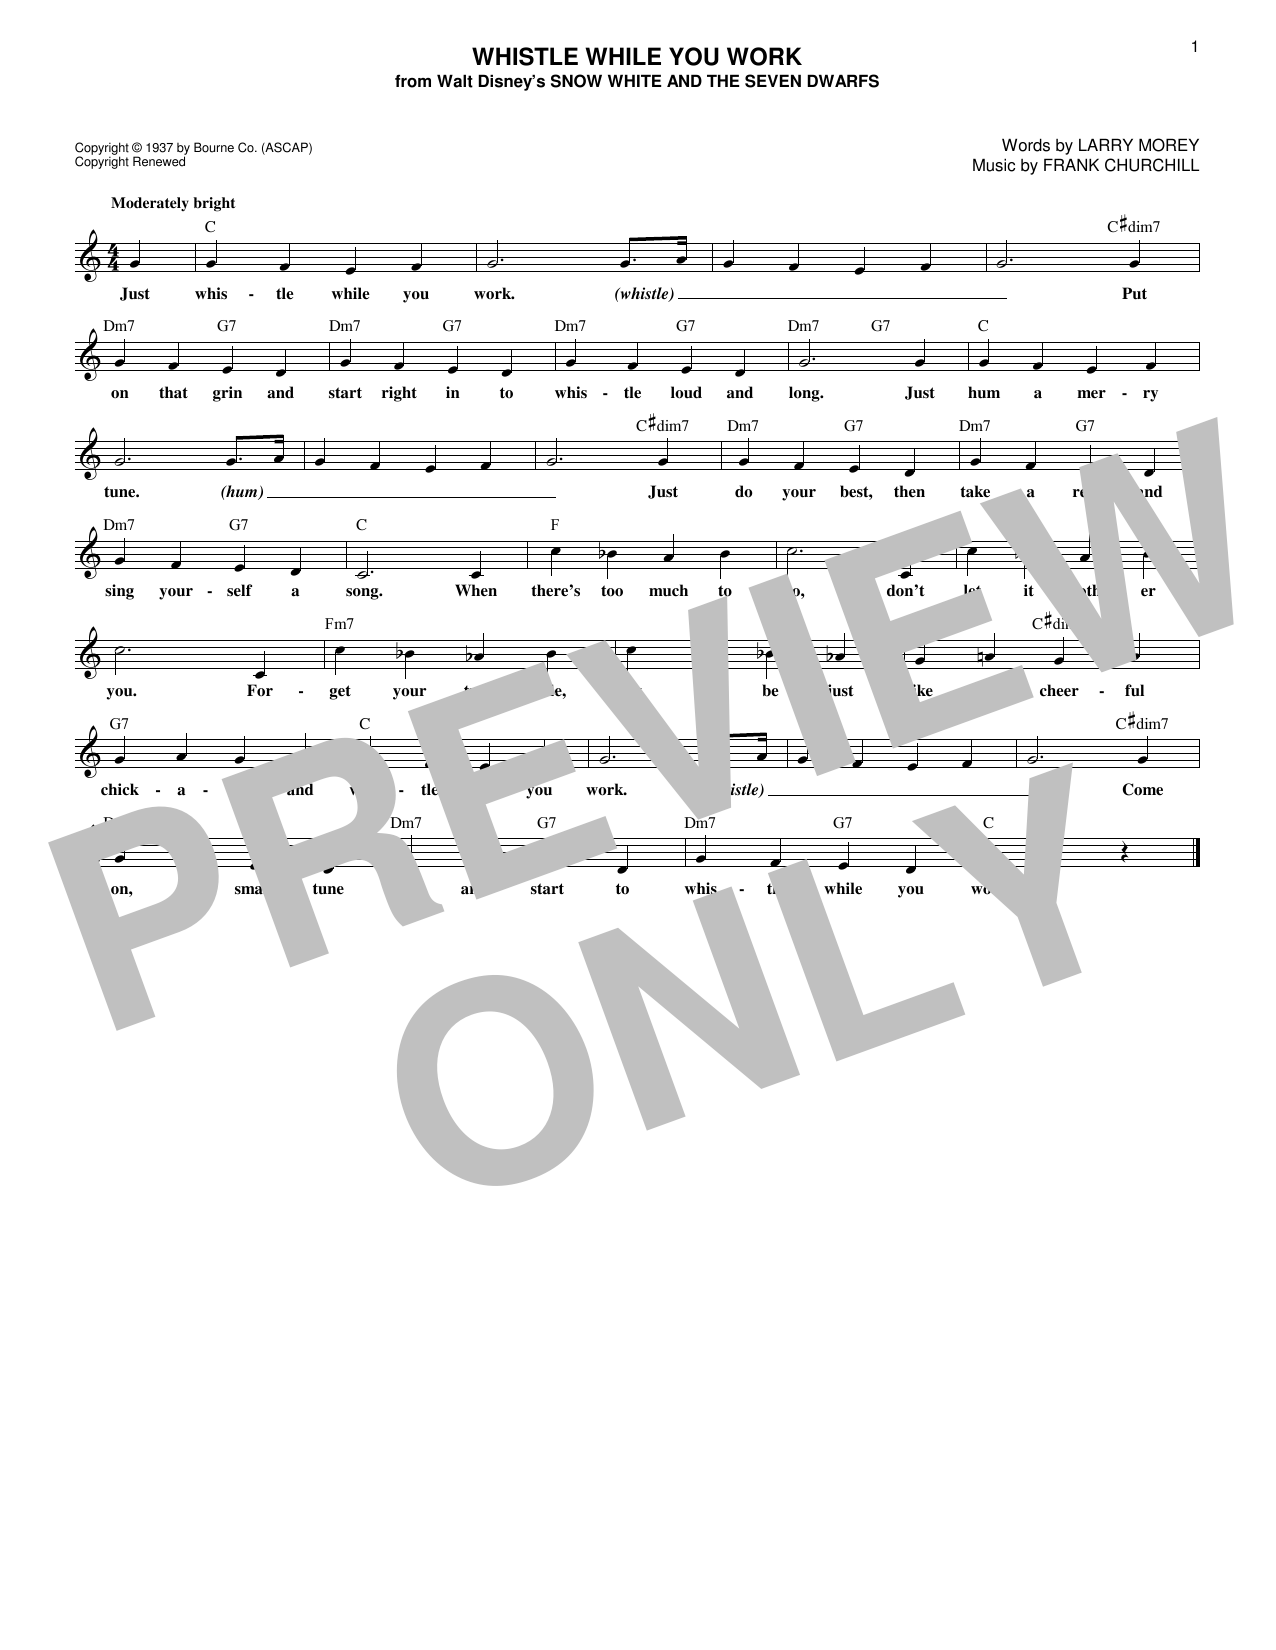 Whistle While You Work Sheet Music Notes Frank Churchill Chords